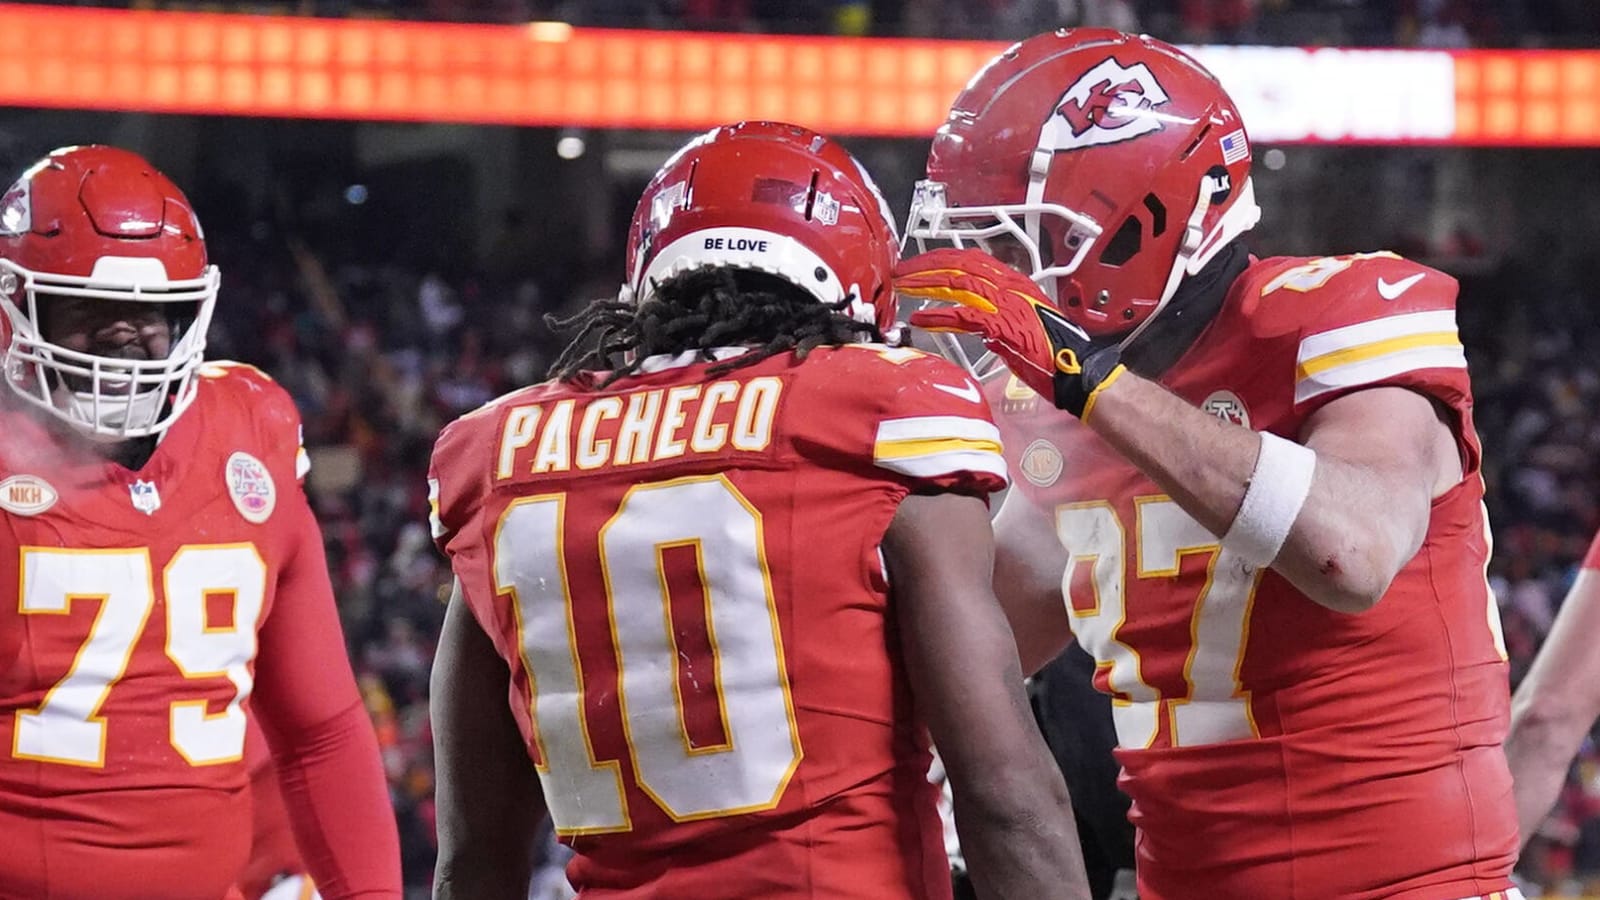 Chiefs rides stellar defense, imperfect offense to blowout win